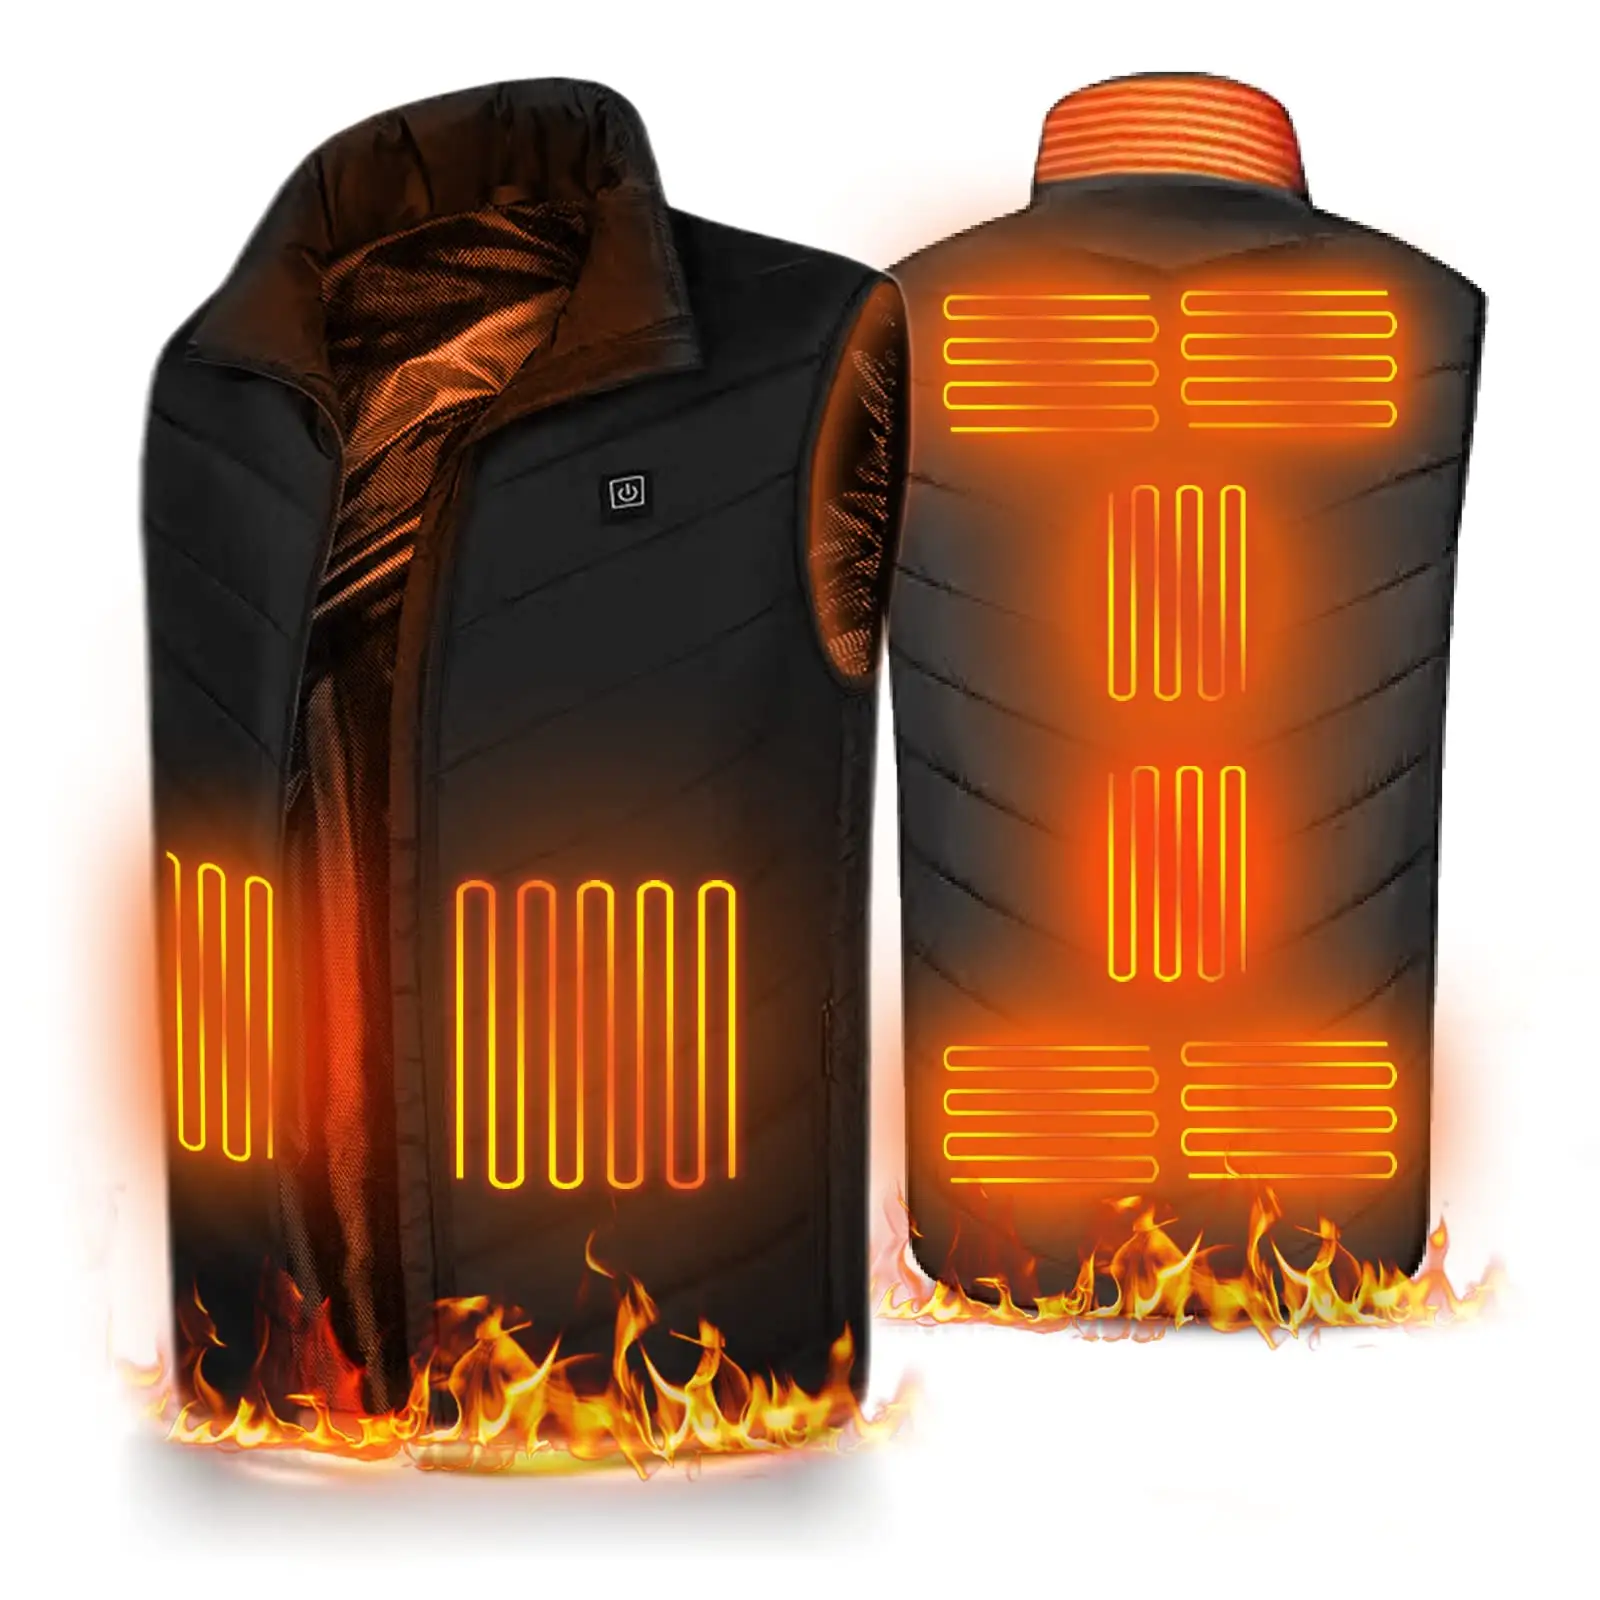 Veste Chauffant Men'S Vests Waistcoats Custom Electric Usb Smart Warm Thermal Winter Clothes Heat Vest Jackets With Battery Pack